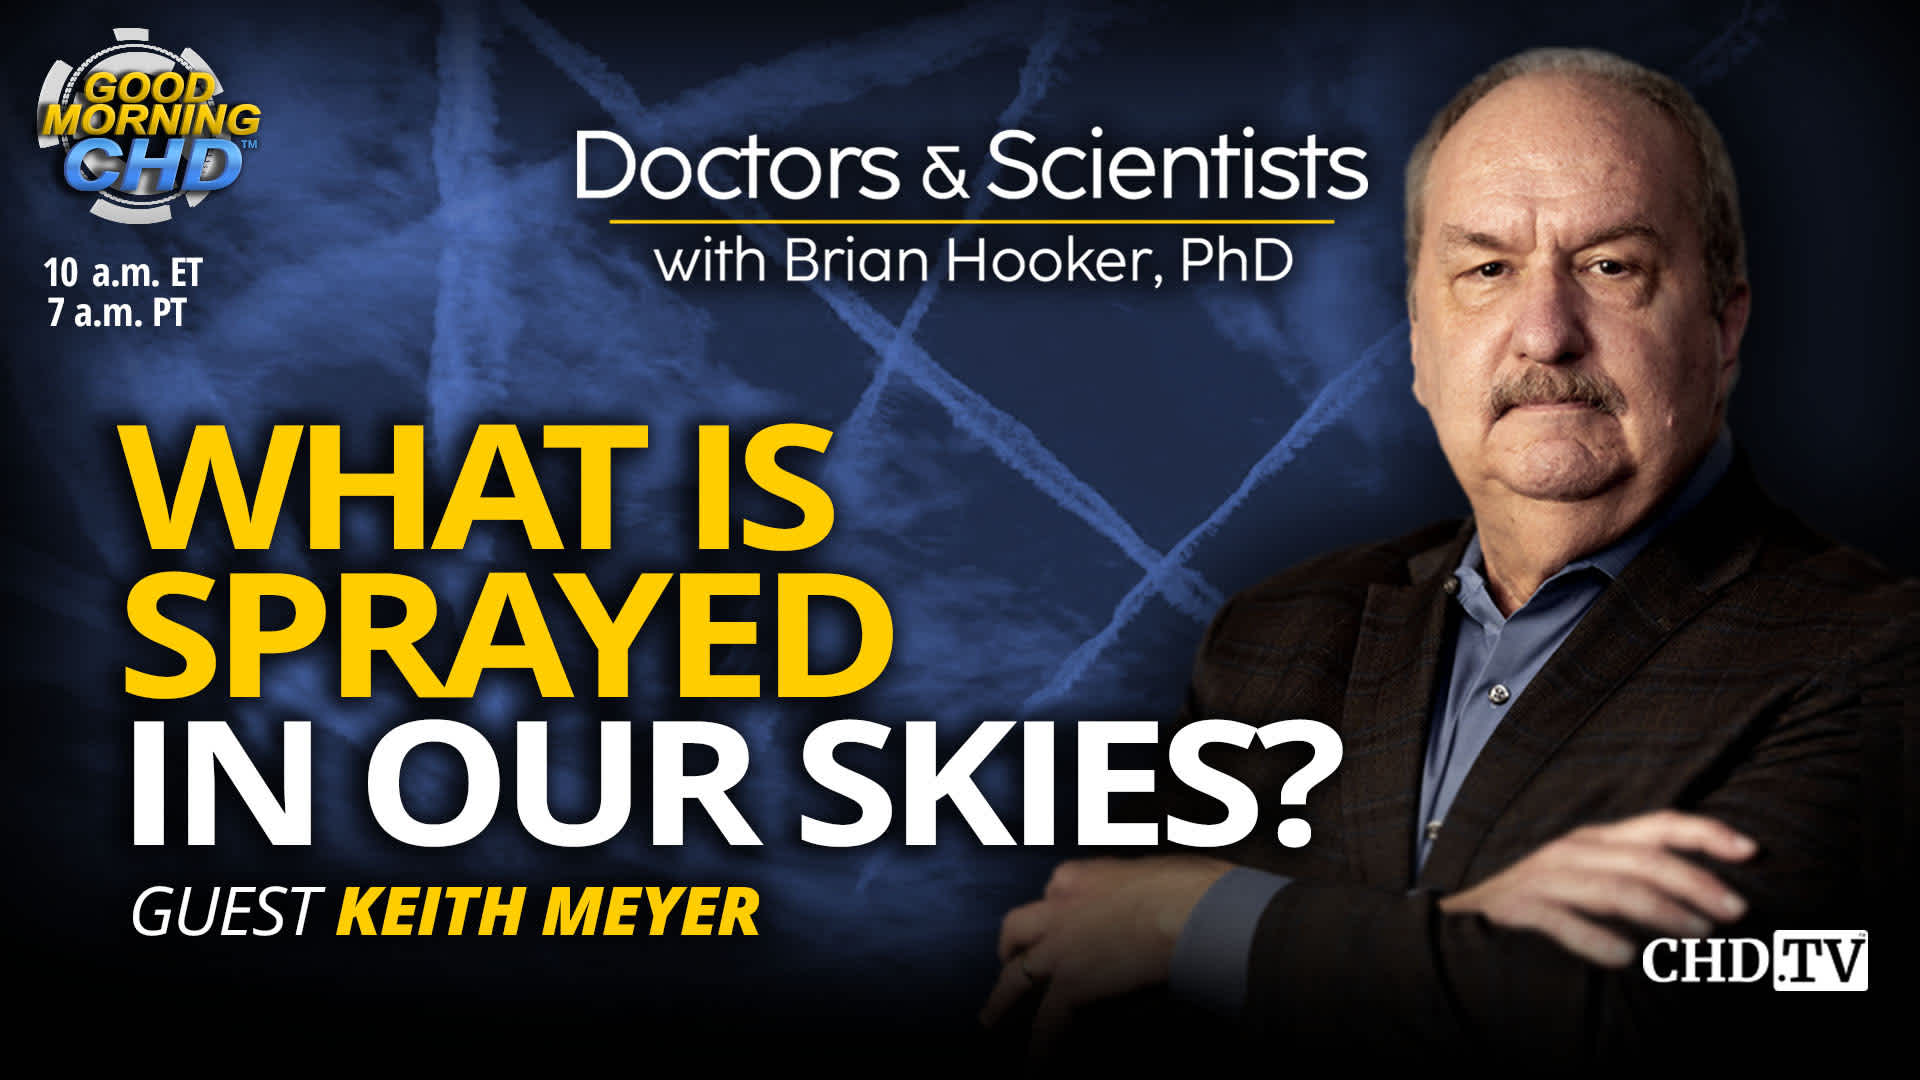 What Is Sprayed in Our Skies?